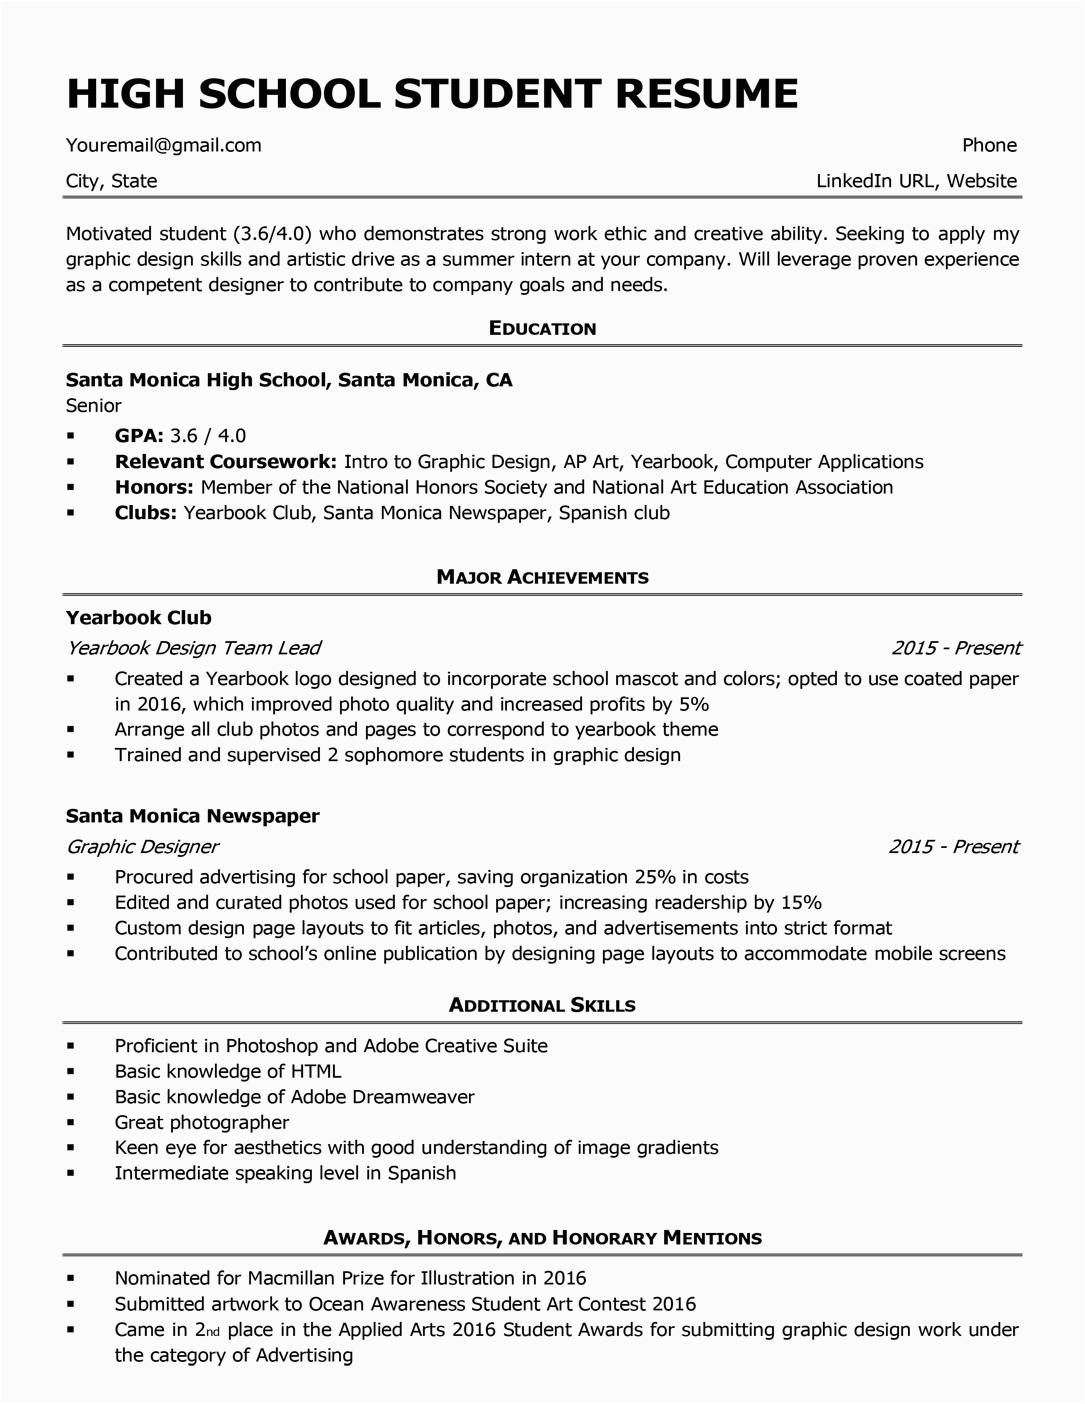 Sample High School Student Resume for College Application High School Resume Template & Writing Tips